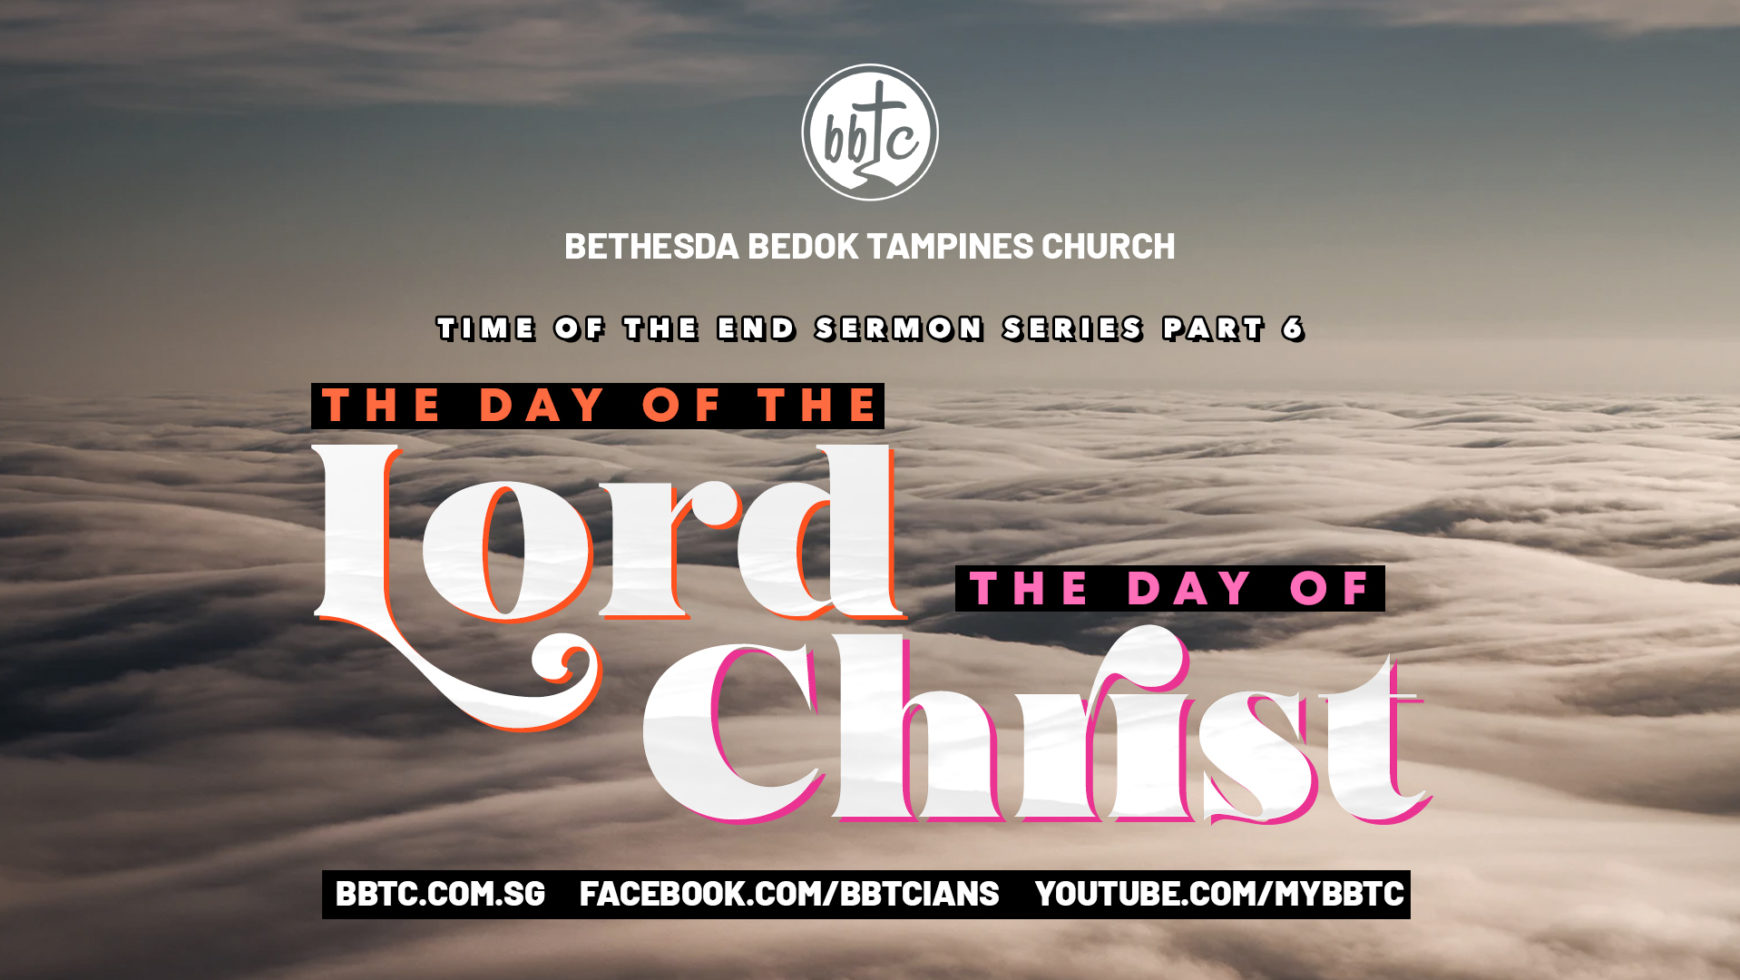 THE DAY OF THE LORD & THE DAY OF CHRIST